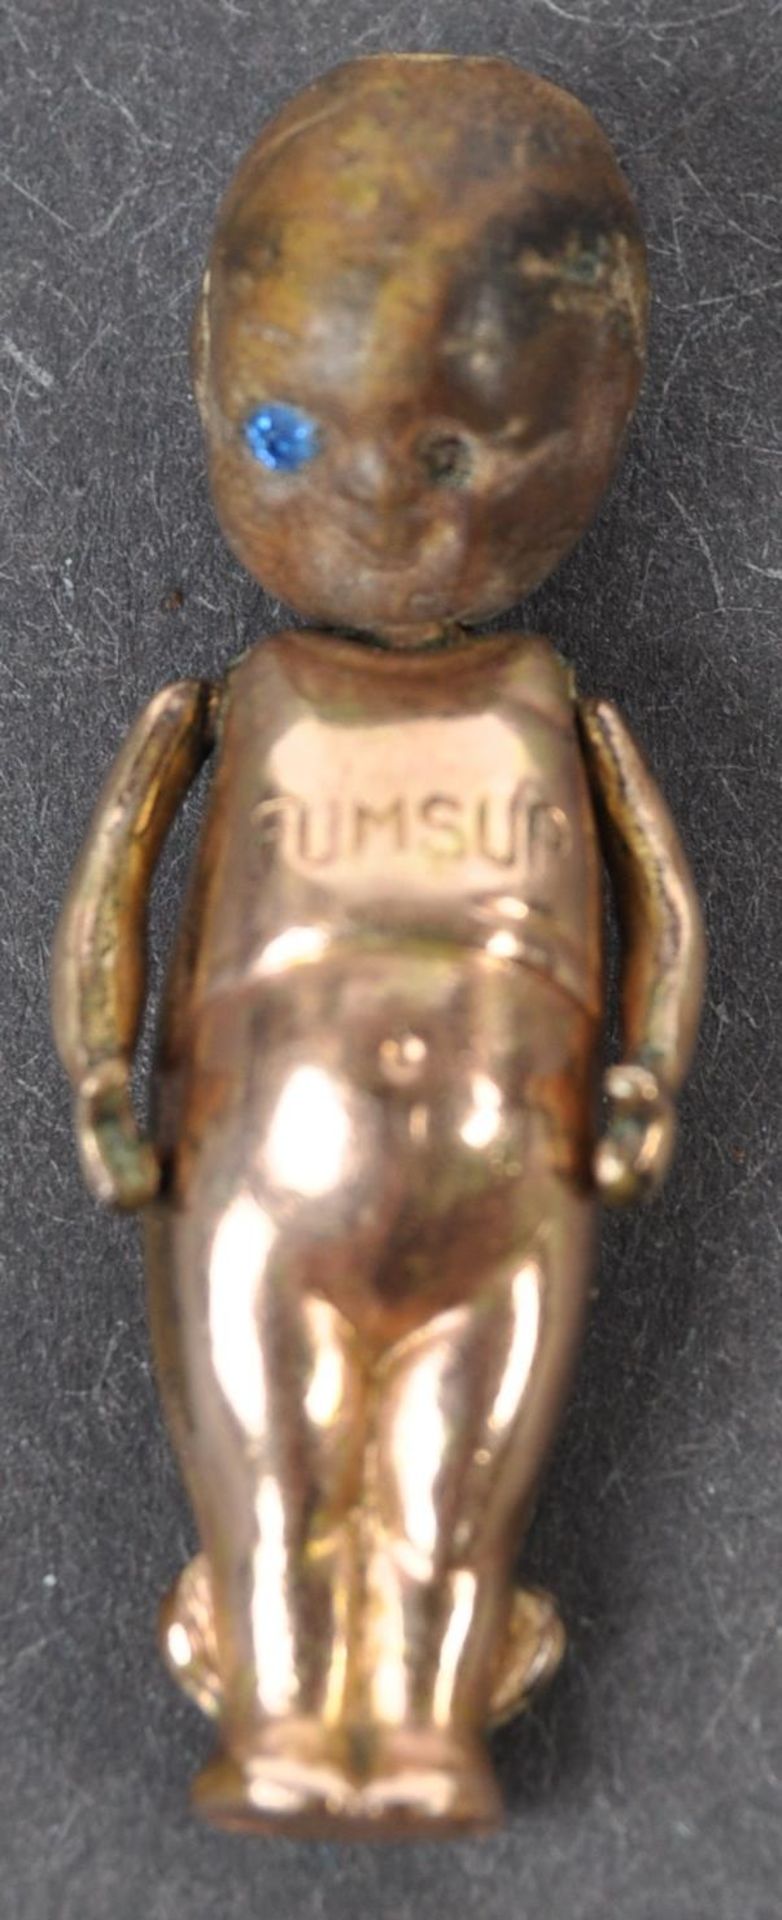 ORIGINAL WWI FIRST WORLD WAR SOLDIERS FUMSUP LUCKY CHARM